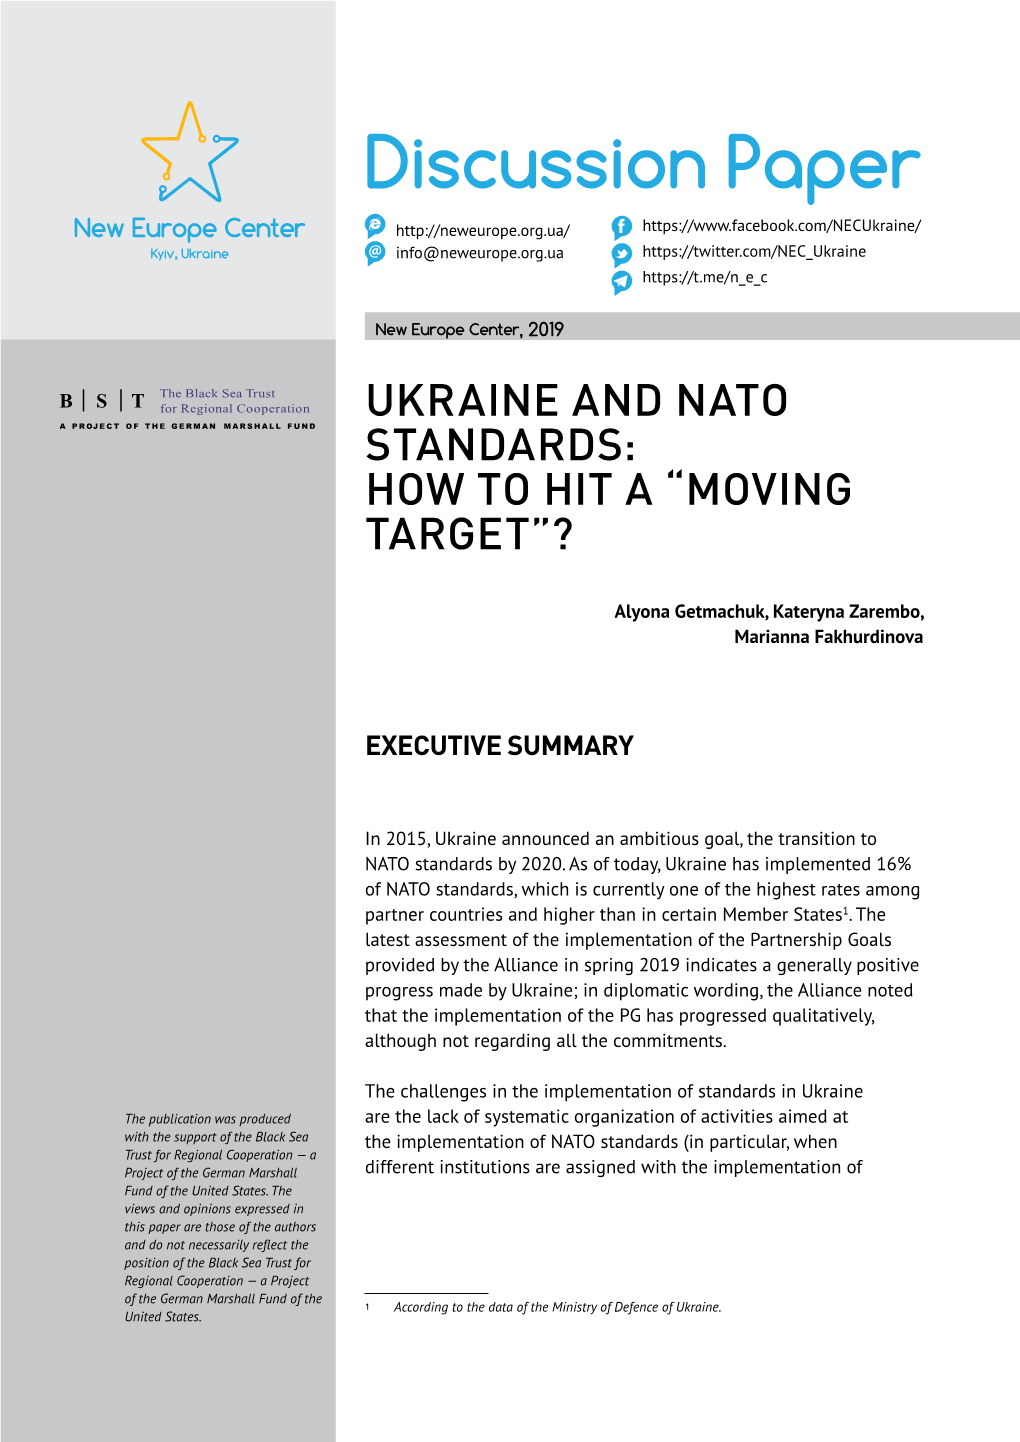 Ukraine and Nato Standards: How to Hit a “Moving Target”?